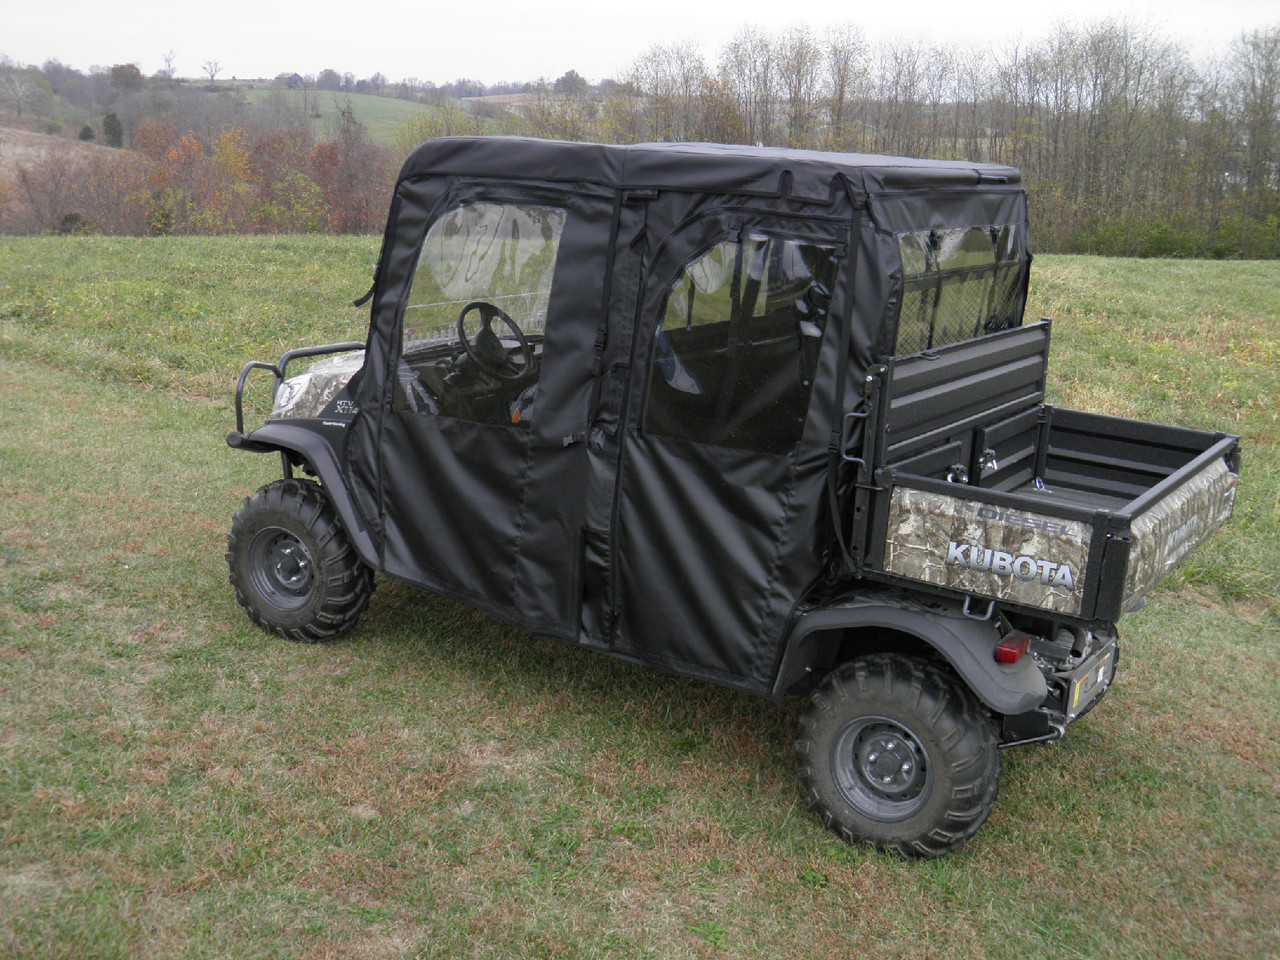 3 Star side x side Kubota RTV X1140 full cab enclosure rear and side angle view distance